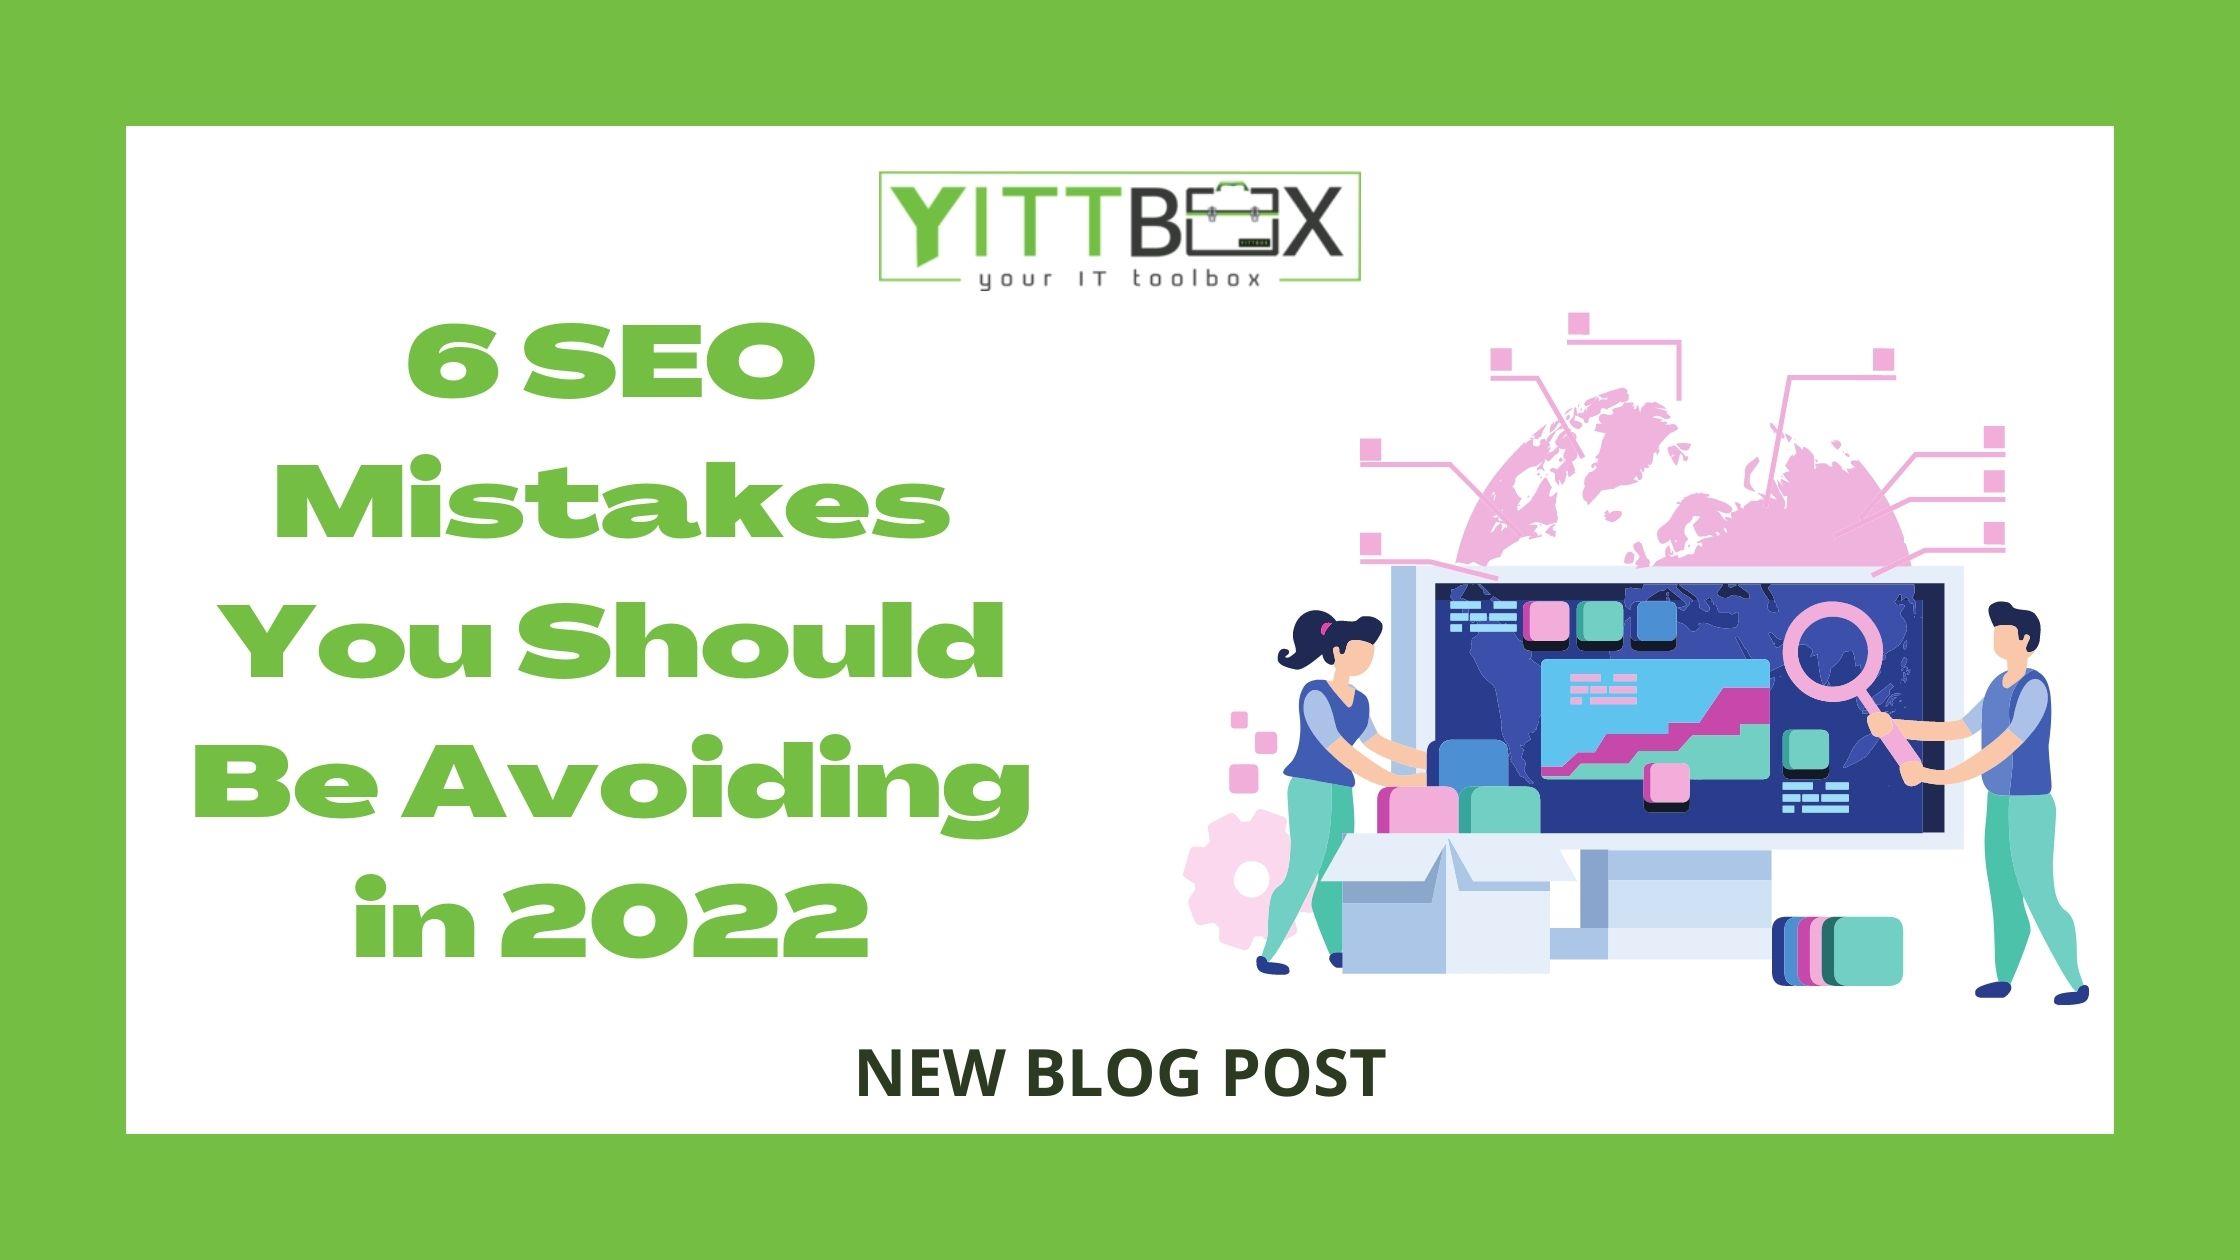 6 SEO Mistakes You Should be Avoiding in 2022